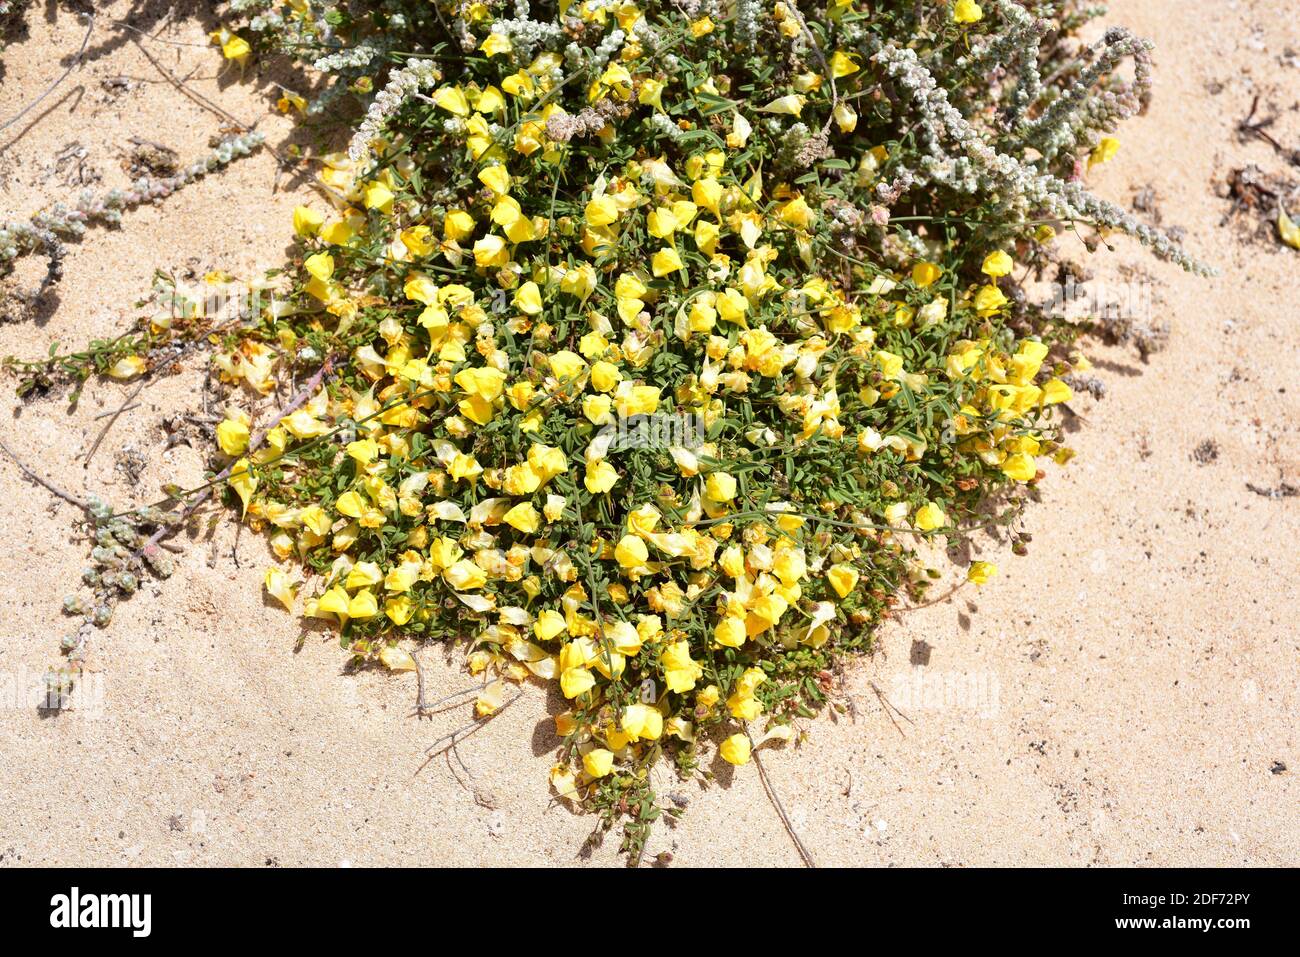 Picopajarito costero (Kickxia sagittata) is an annual prostrate herb native to Canary Islands and nothwestern Africa. This photo was taken in Stock Photo